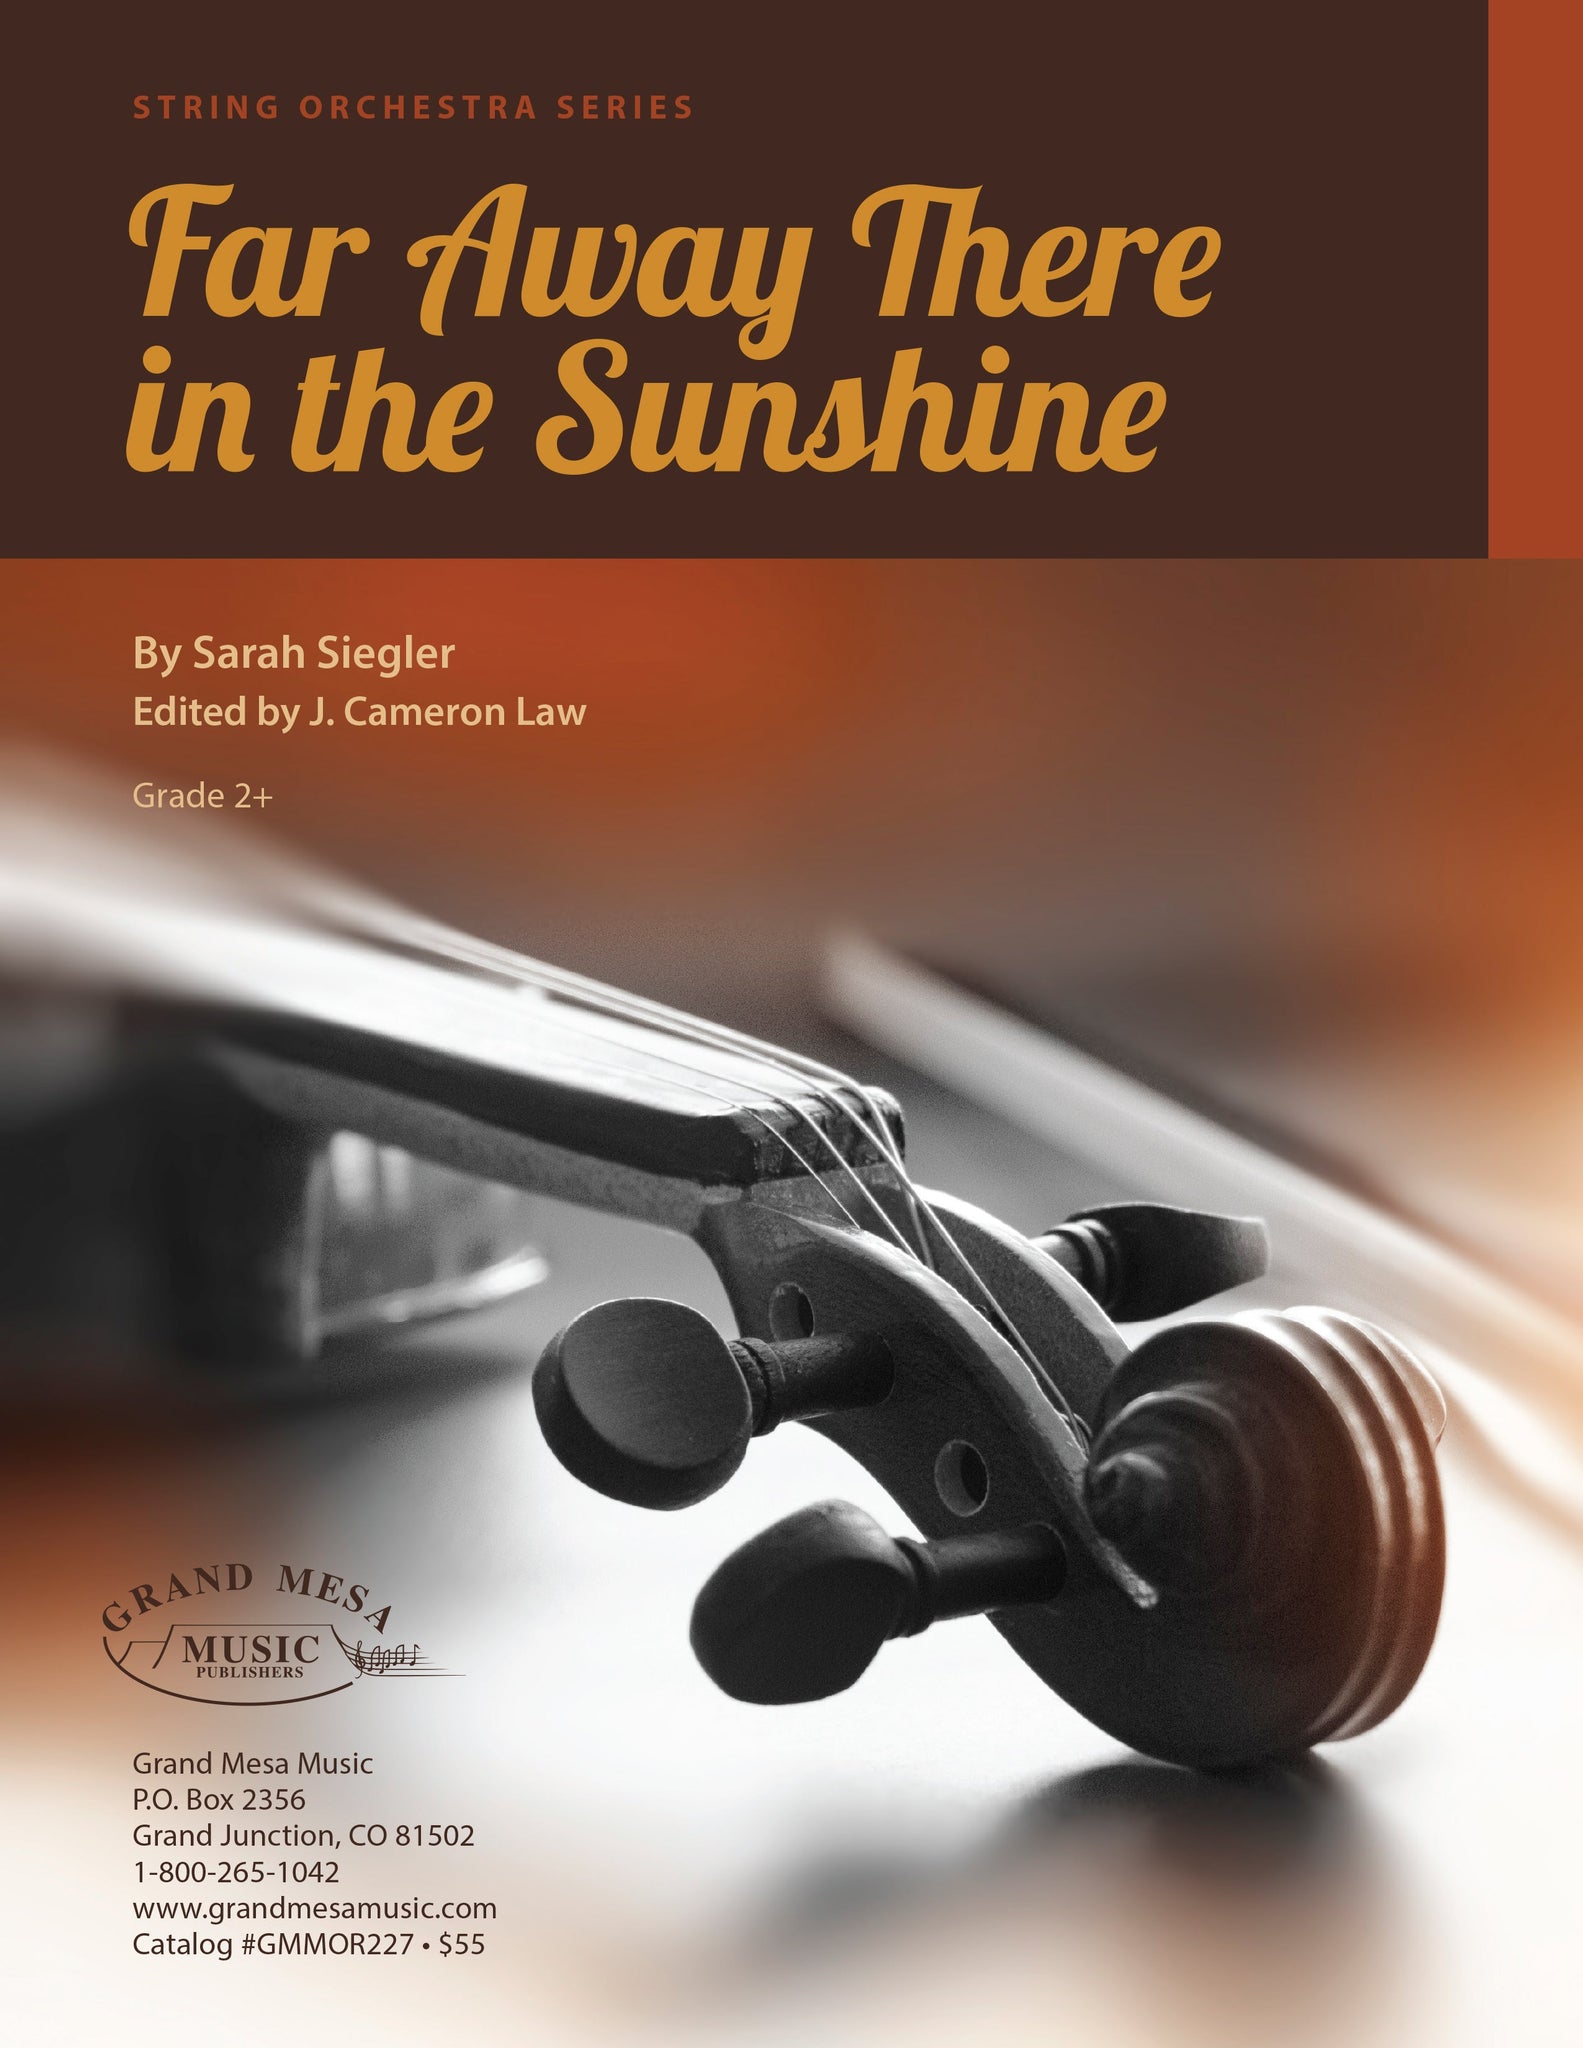 Strings sheet music cover of Far Away There in the Sunshine, composed by Sarah Siegler.